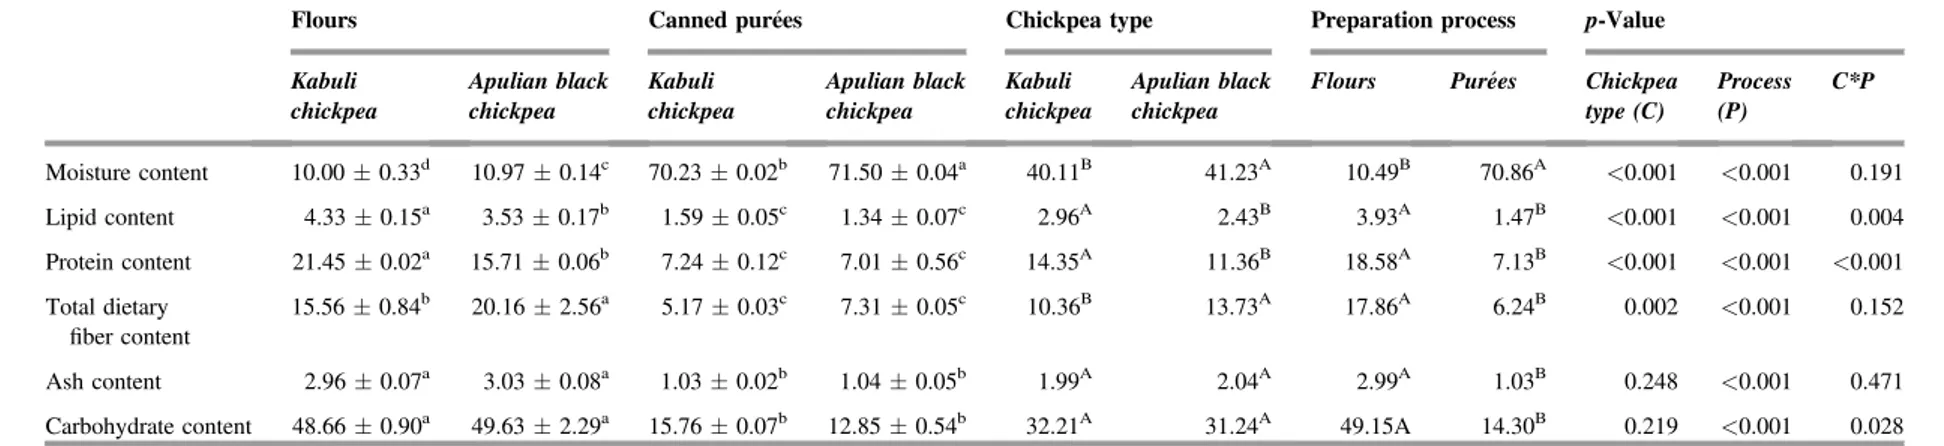 Table 1. Mean value, standard deviation and results of statistical analysis of proximate composition of chickpea whole meal ﬂours and canned purees, expressed as g/100 g (wet basis).